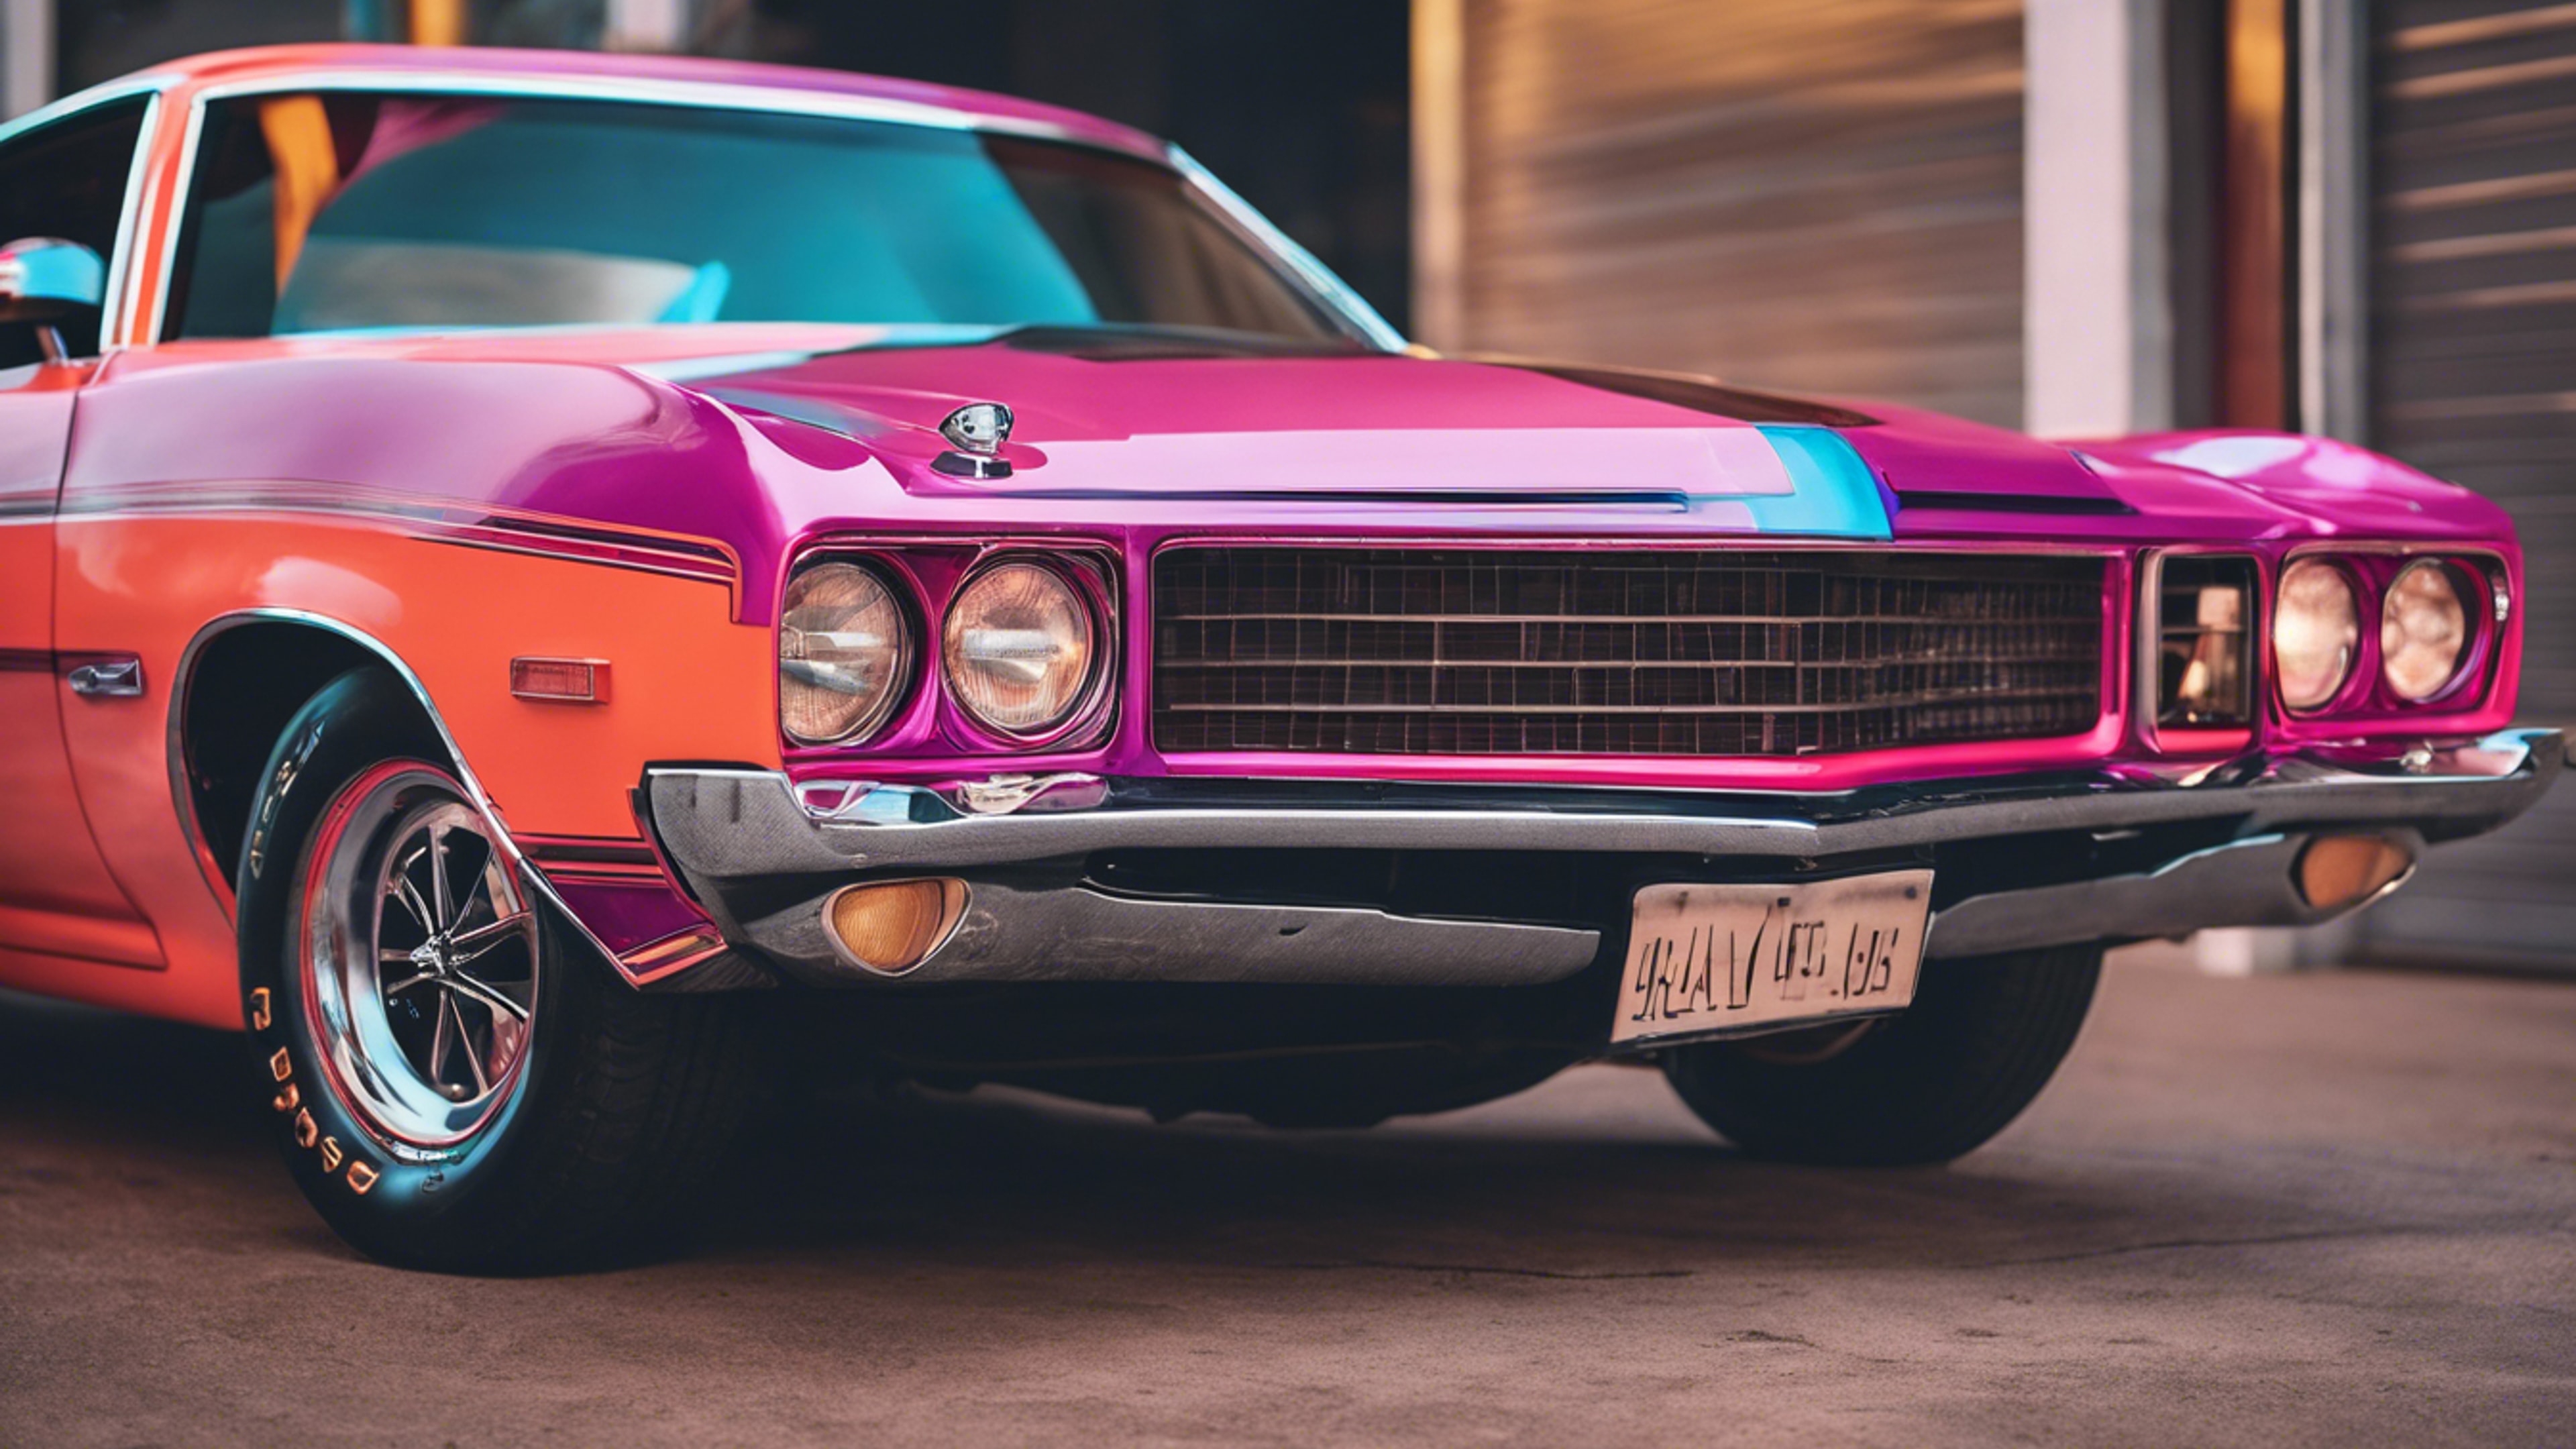 A classic American muscle car from the 1970s, printed in bright neon colors Taustakuva[fa60d4cf89e348ffade4]